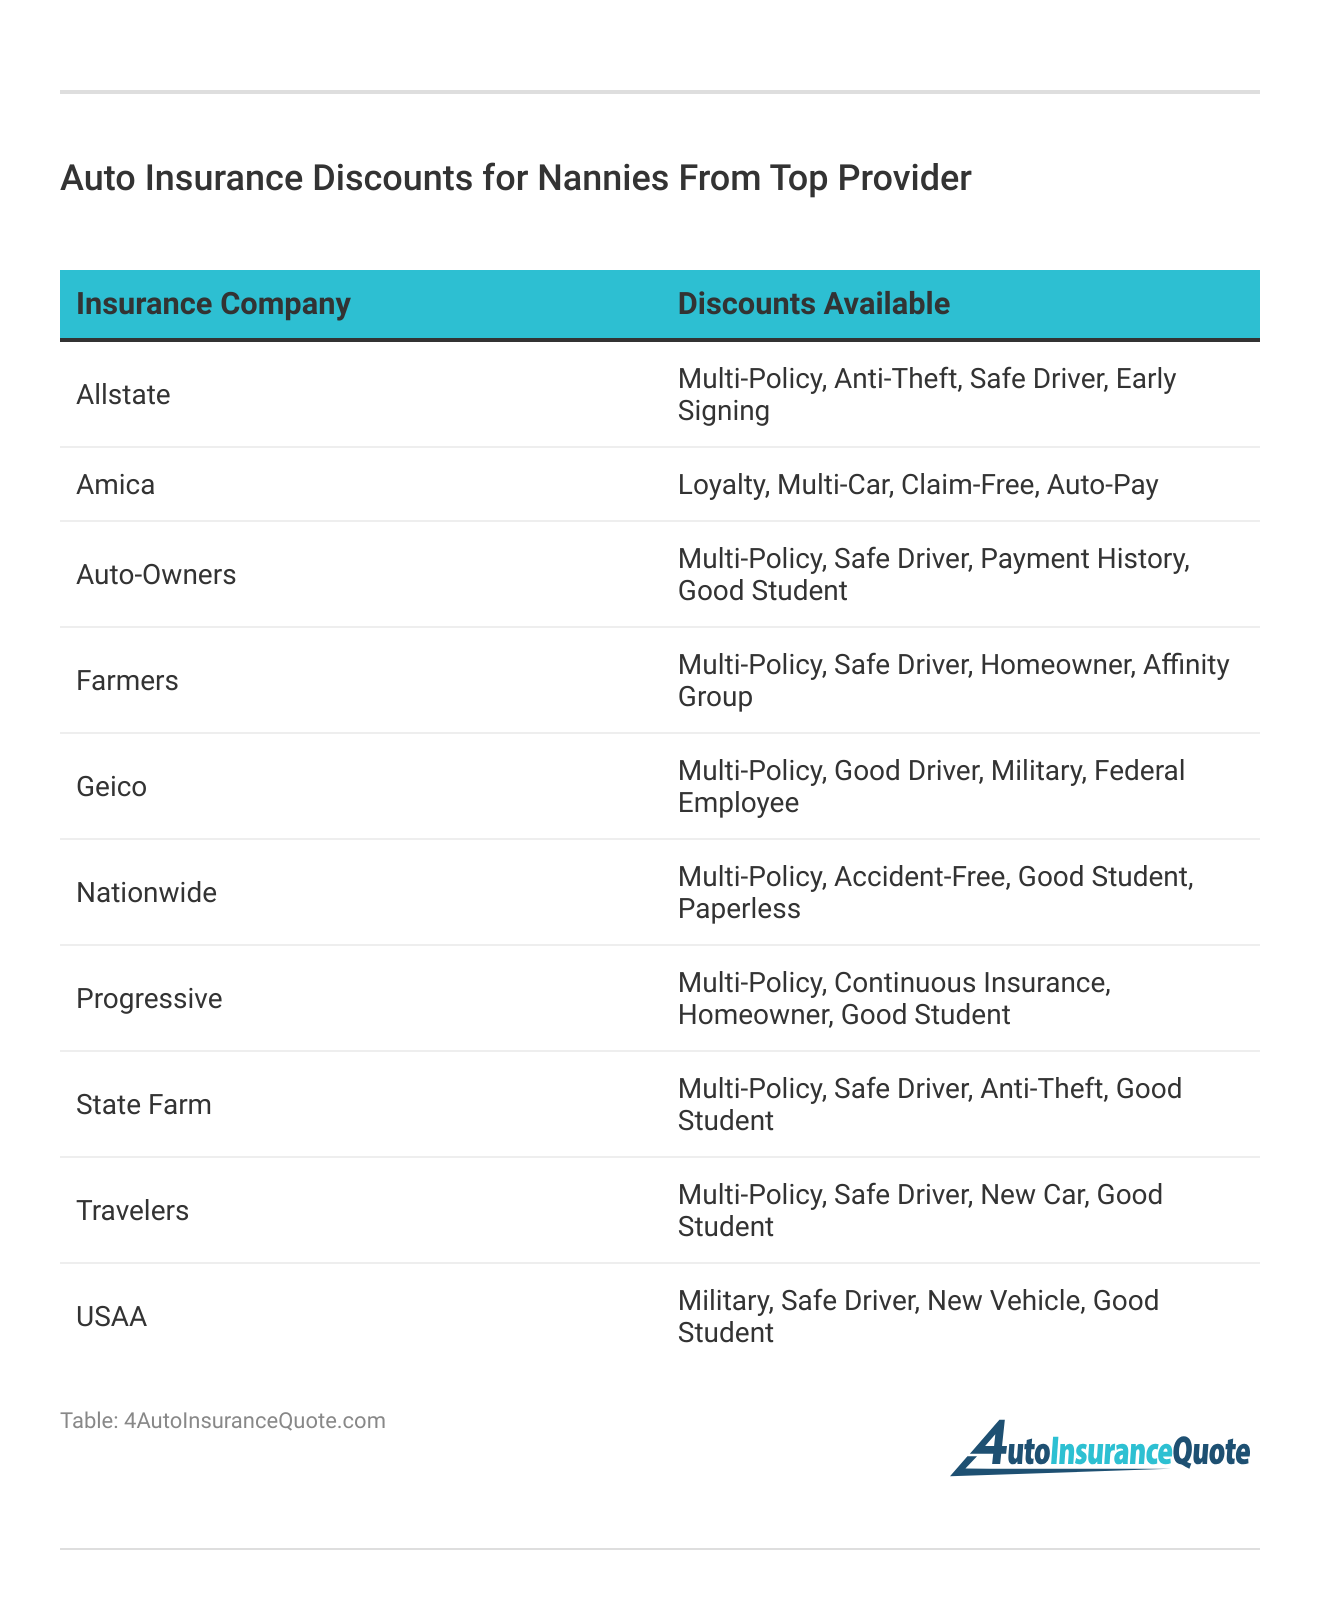 <h3>Auto Insurance Discounts for Nannies From Top Provider</h3>